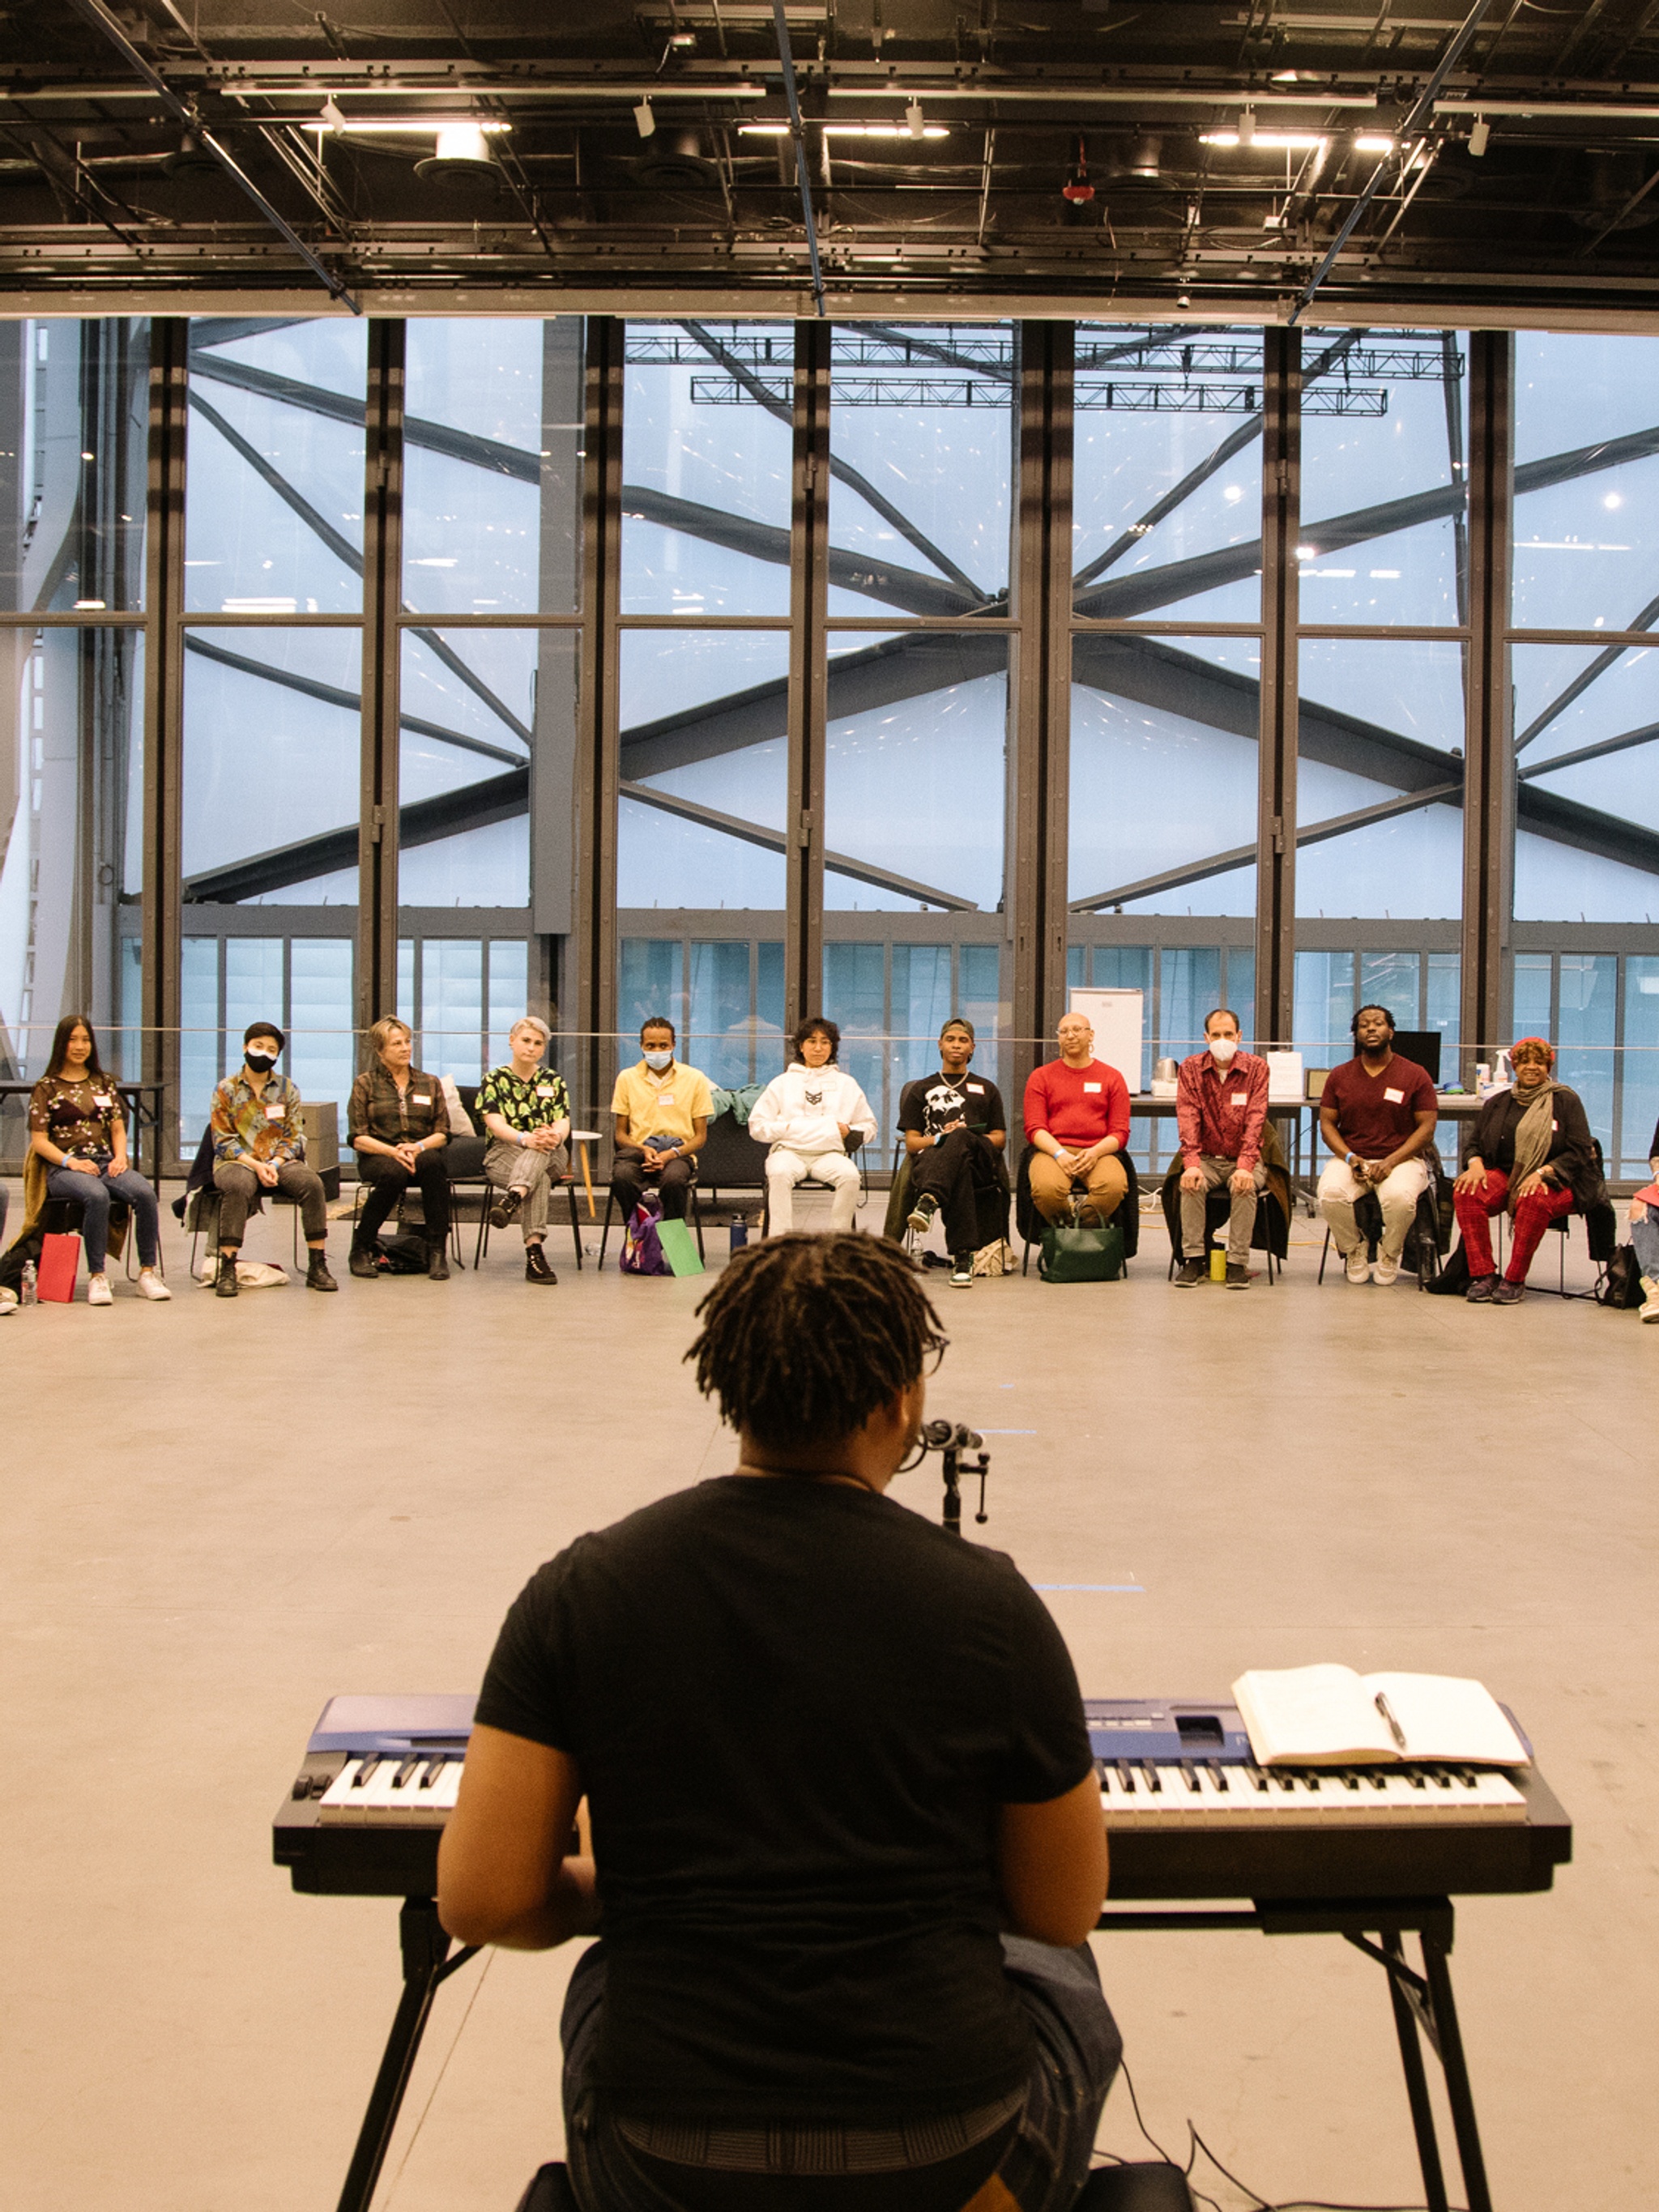 The artist Troy Anthony sits at a keyboard with his back to the camera facing a semicircle of people of various ages and races seated across a wide performance space with high ceilings at The Shed